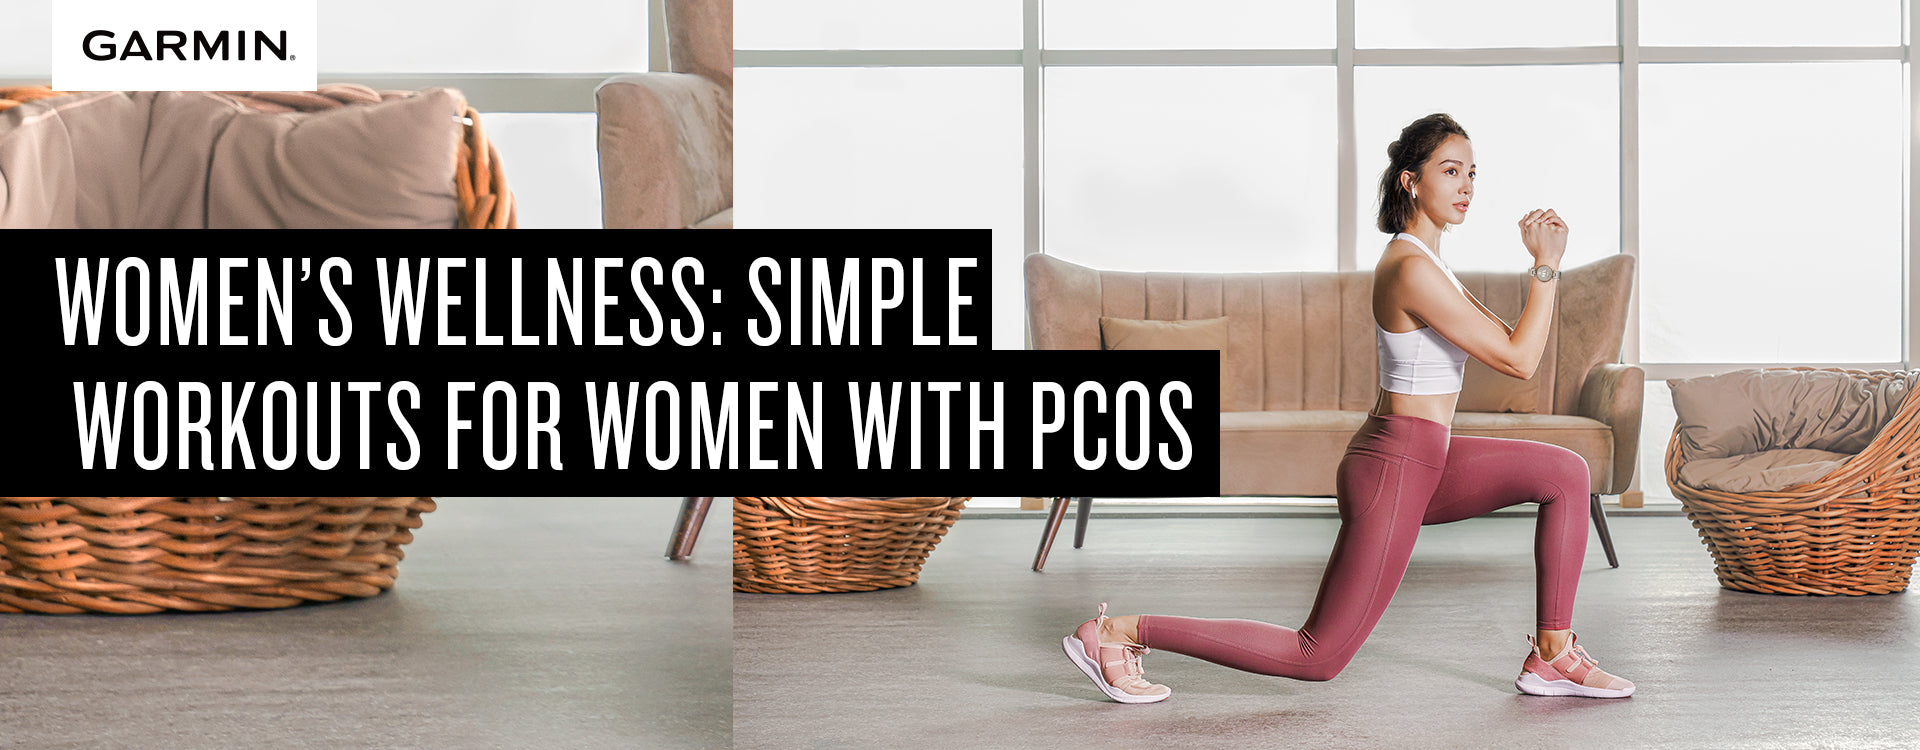 Women’s Wellness: Simple Workouts for Women with PCOS